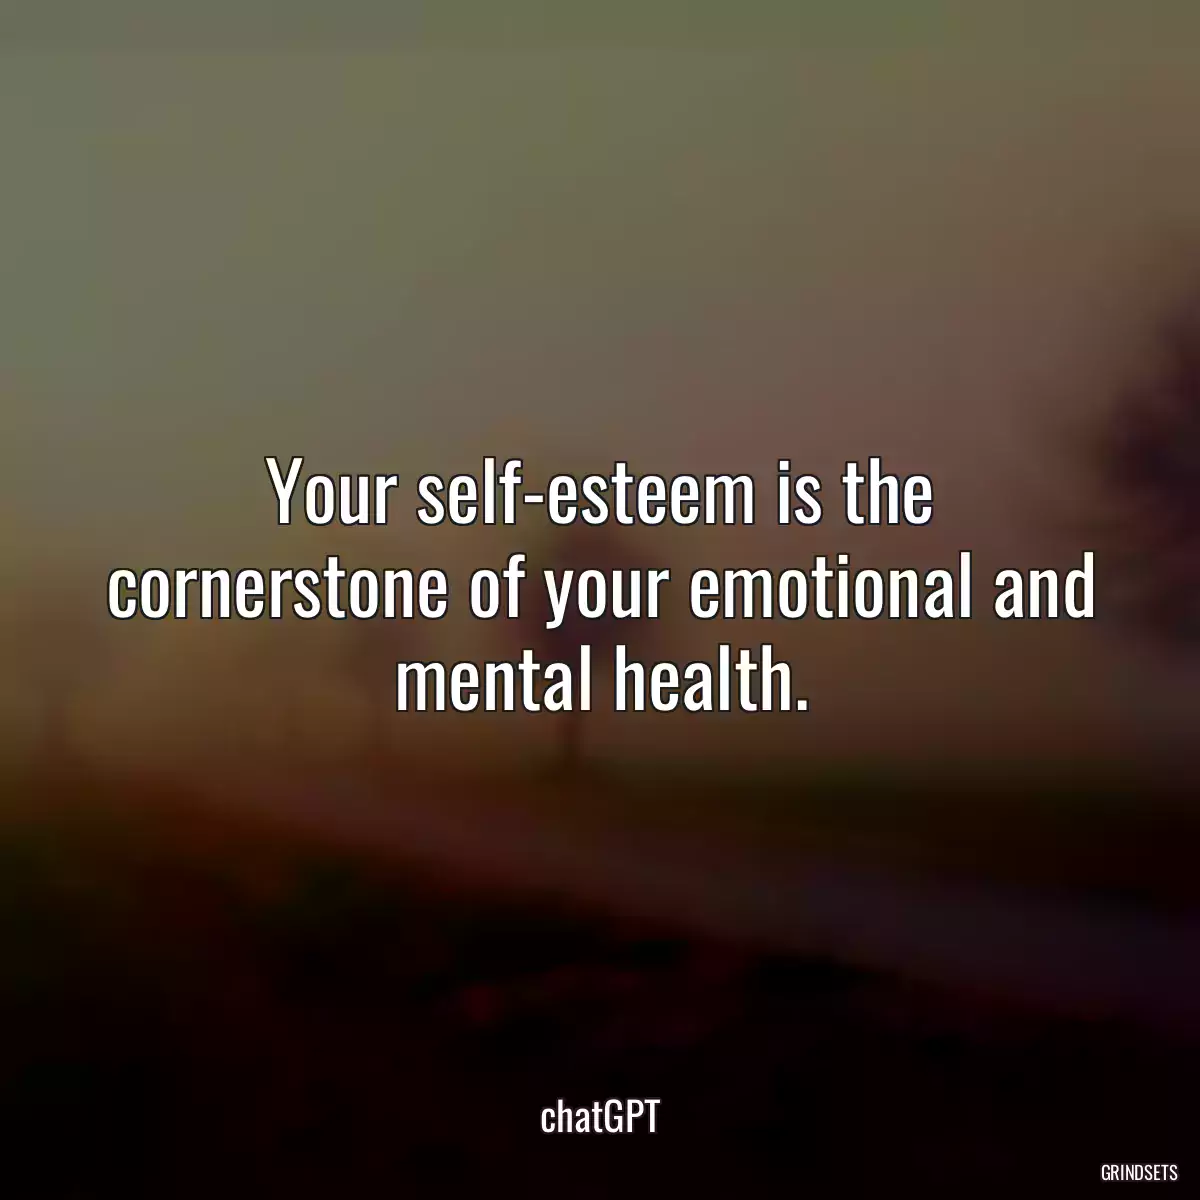 Your self-esteem is the cornerstone of your emotional and mental health.